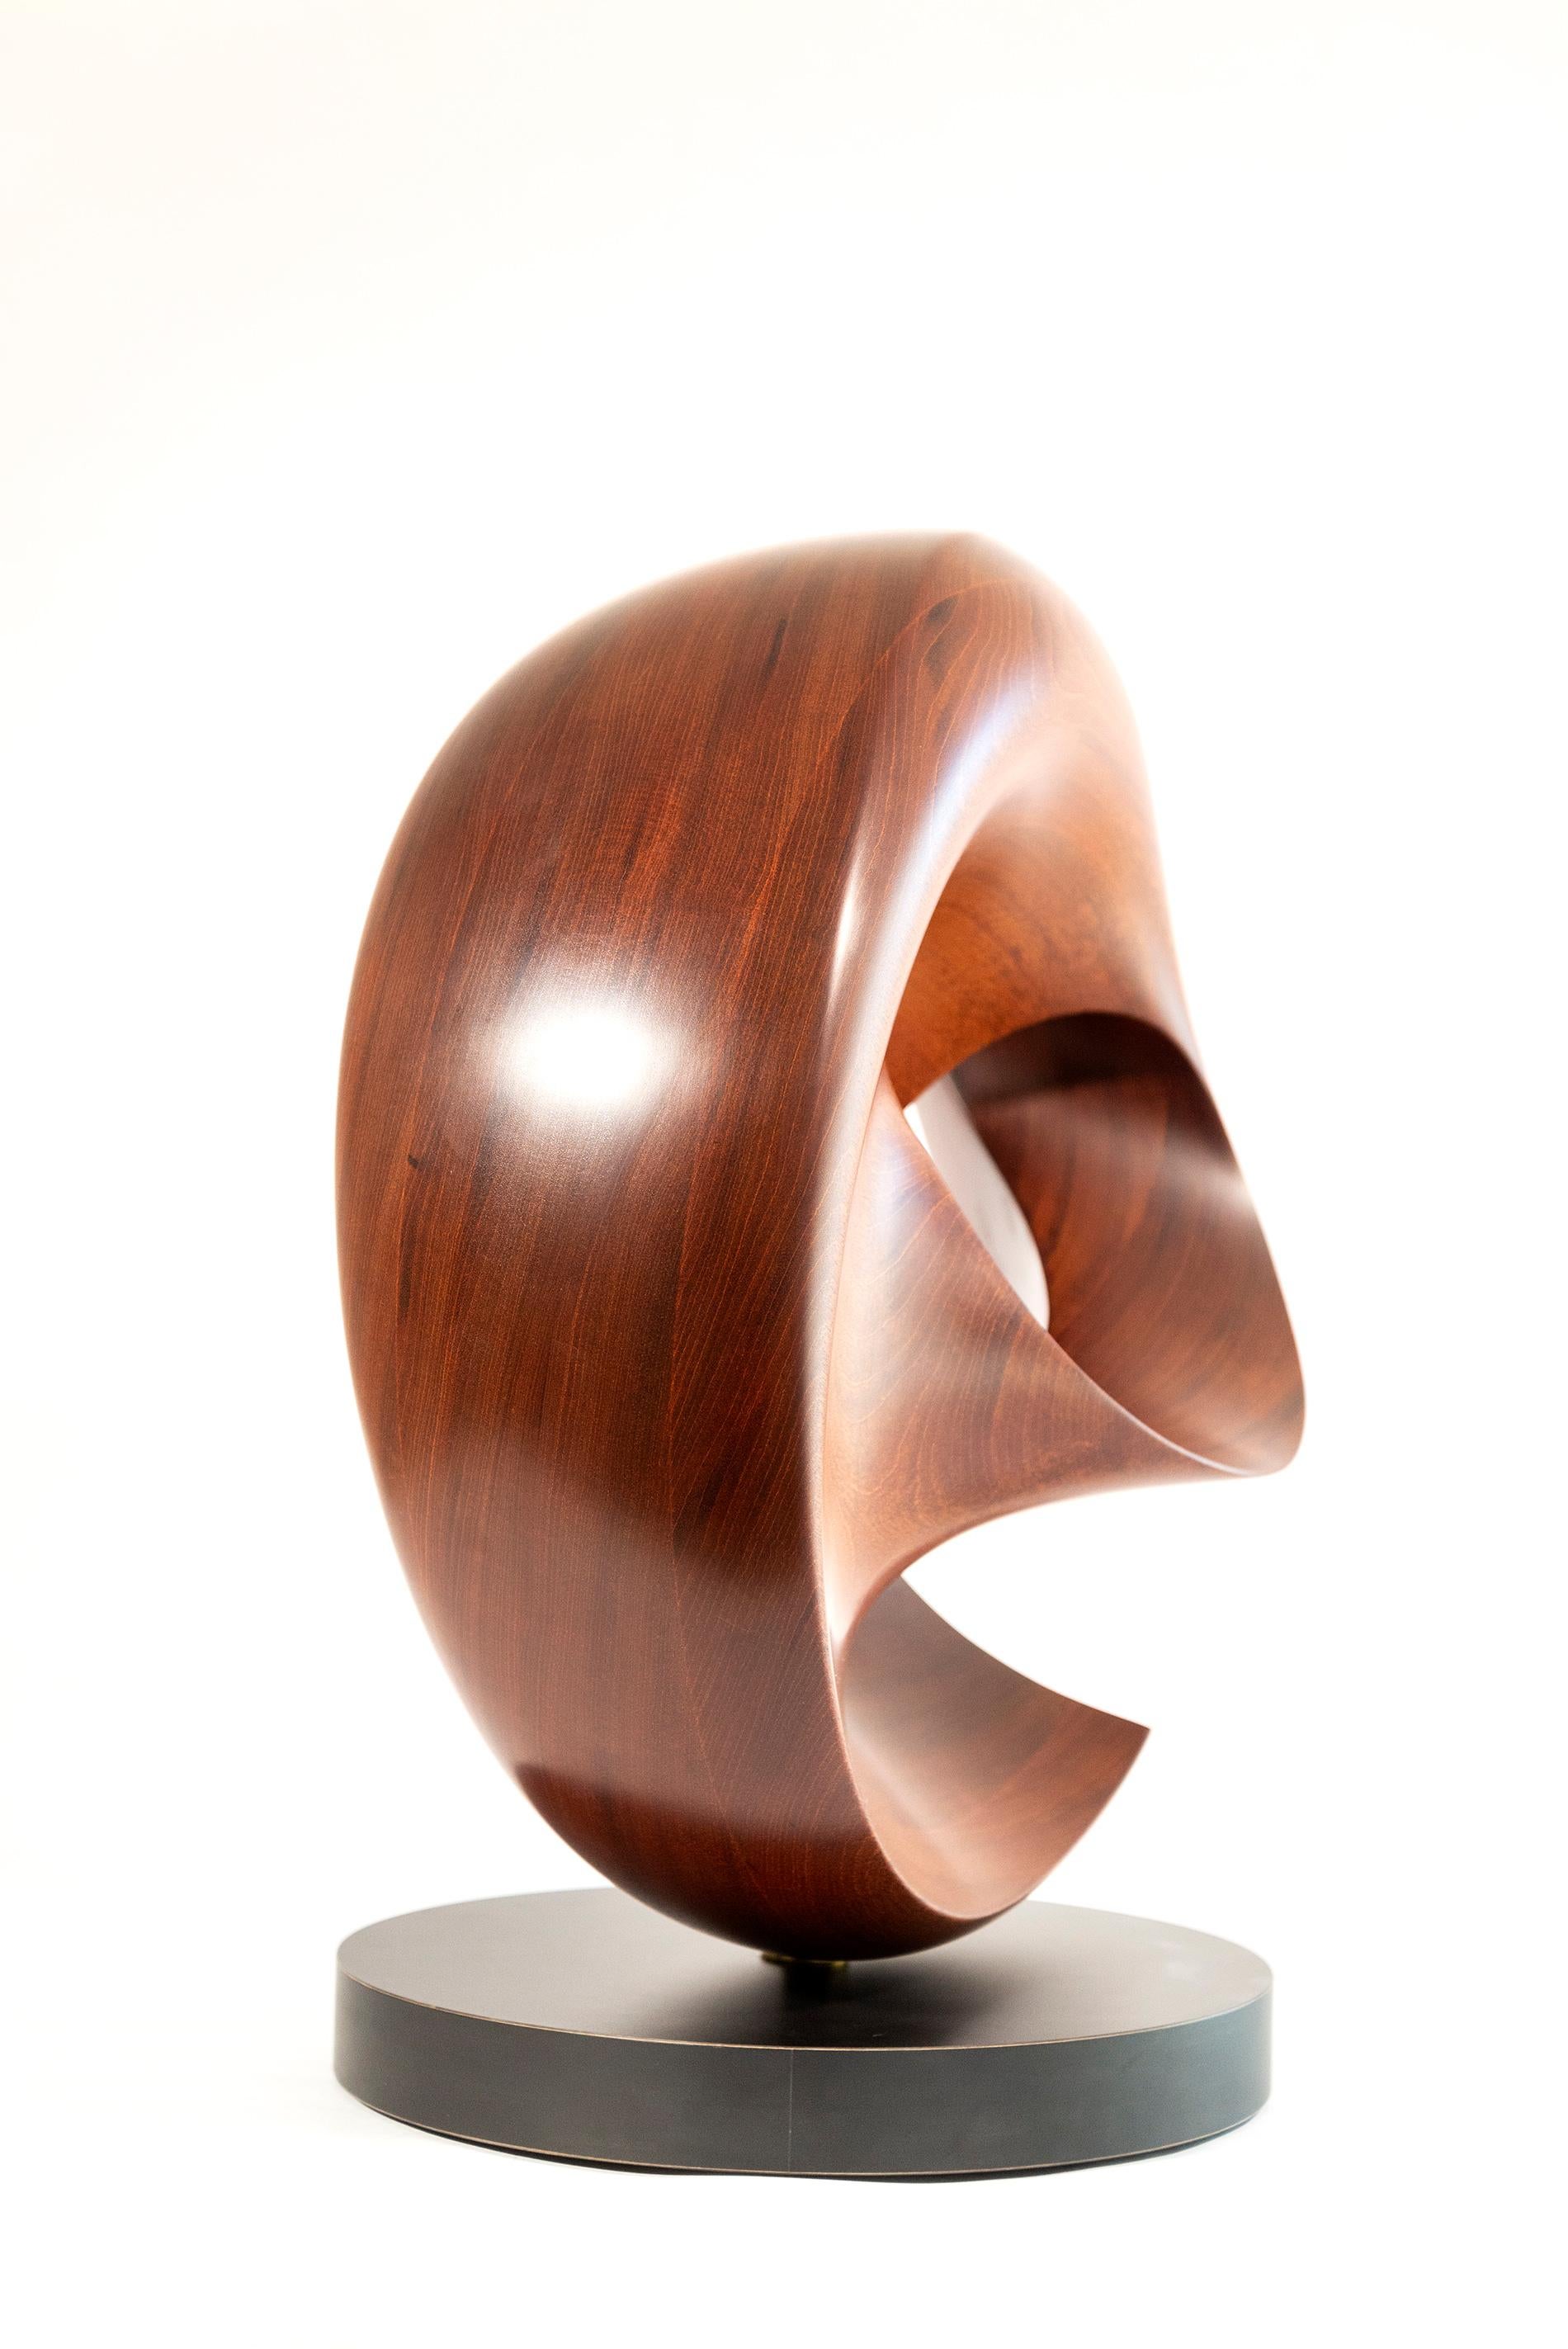 Fanfare - smooth, polished, abstract, contemporary, mahogany carved sculpture 3